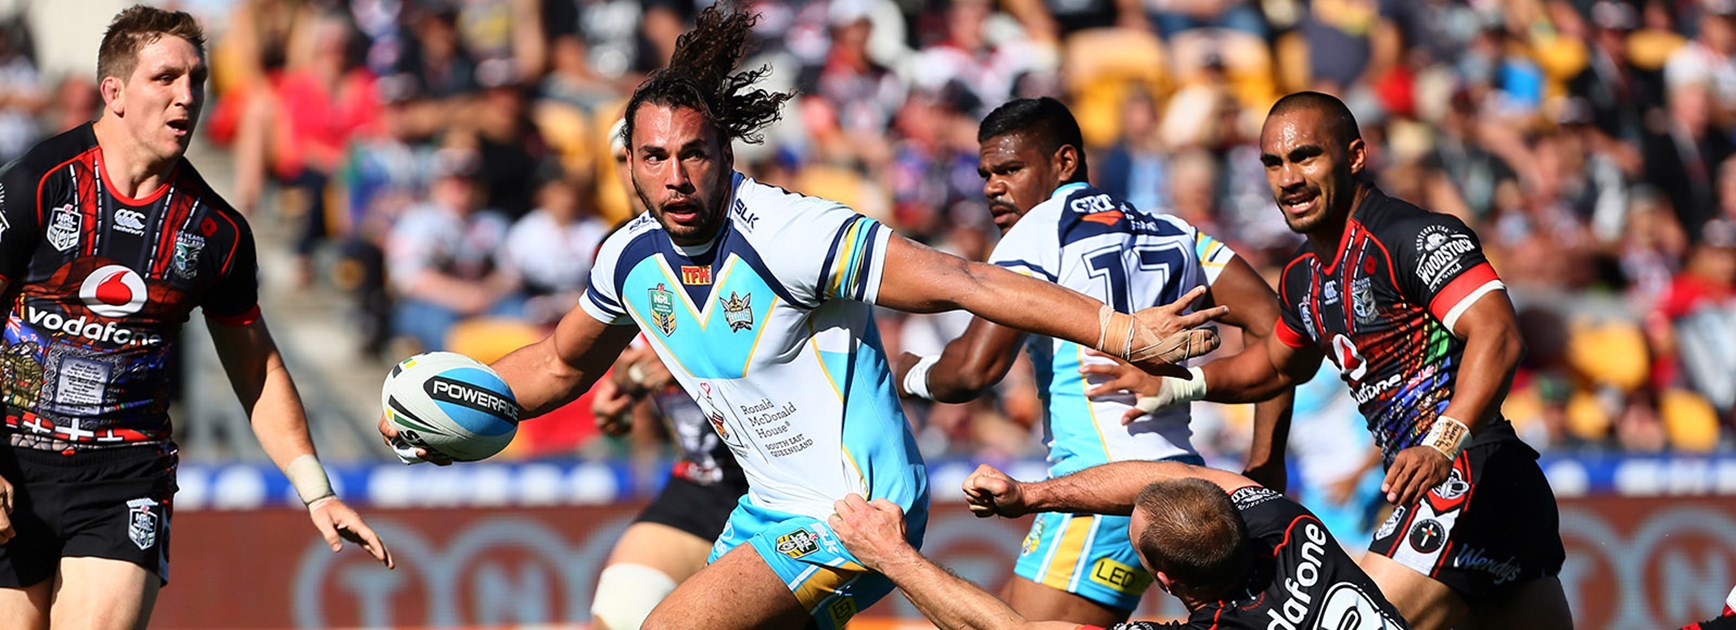 Gold Coast Titans forward Ryan James proved to be a handful for the Warriors in their Round 8 clash.